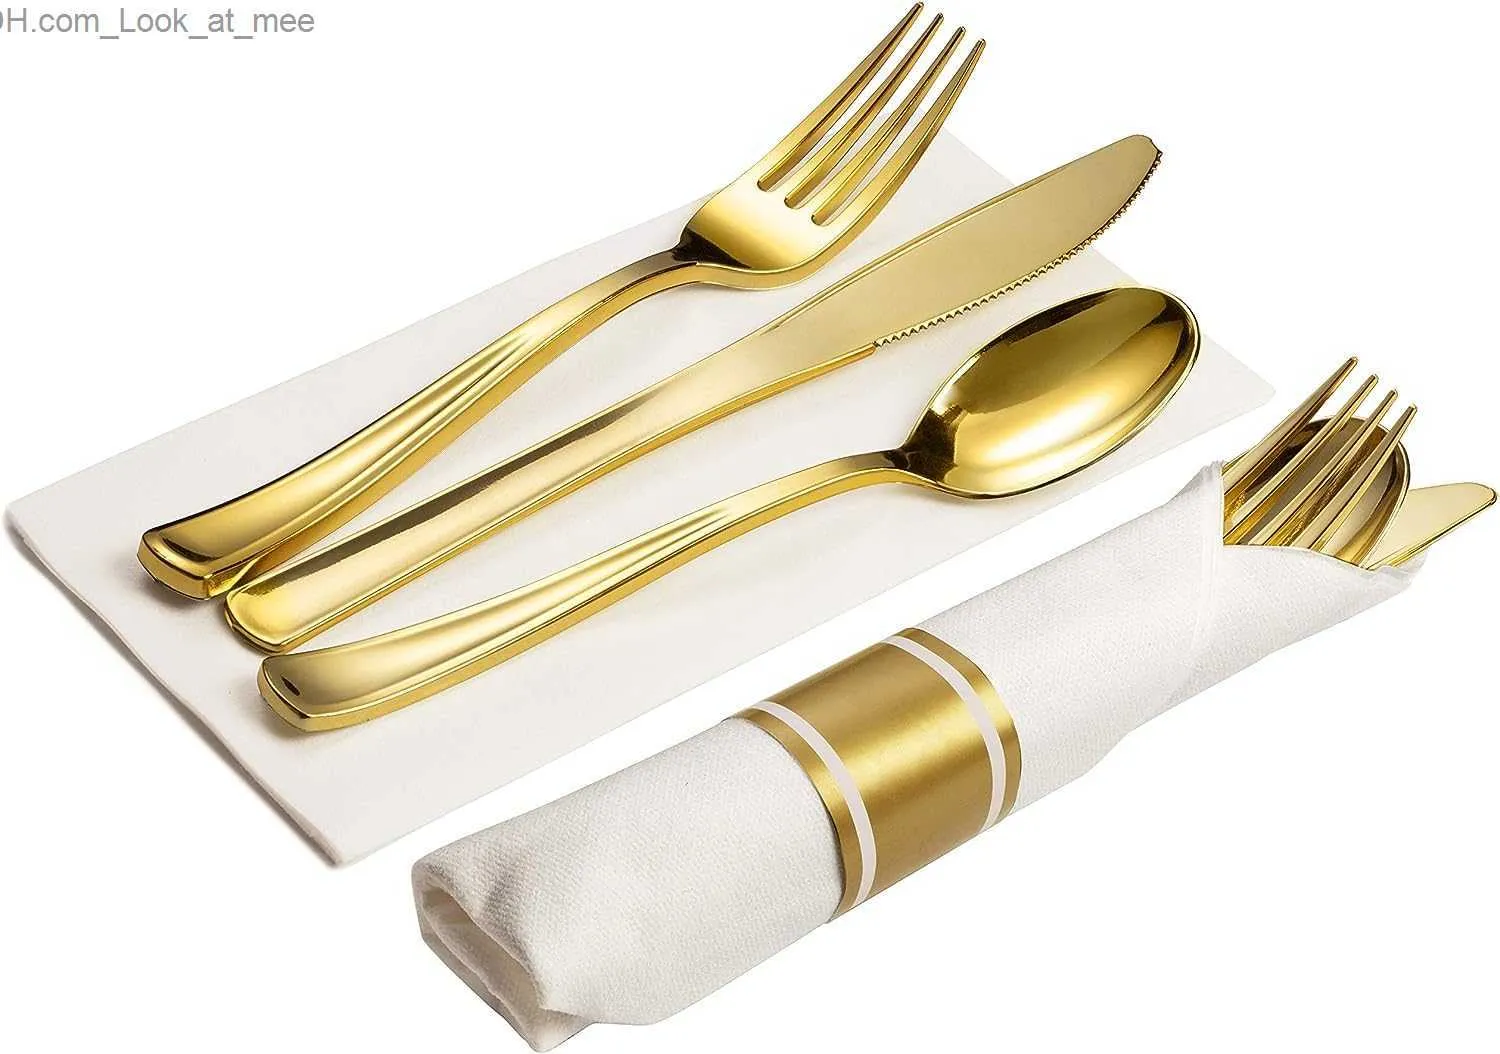 Pre Rolled Napkin Cutlery Set Disposable Wrapped Silverware For Parties,  Weddings, And More Gold Plastic Villeroy & Boch Tableware Q230829 From  Look_at_mee, $5.48